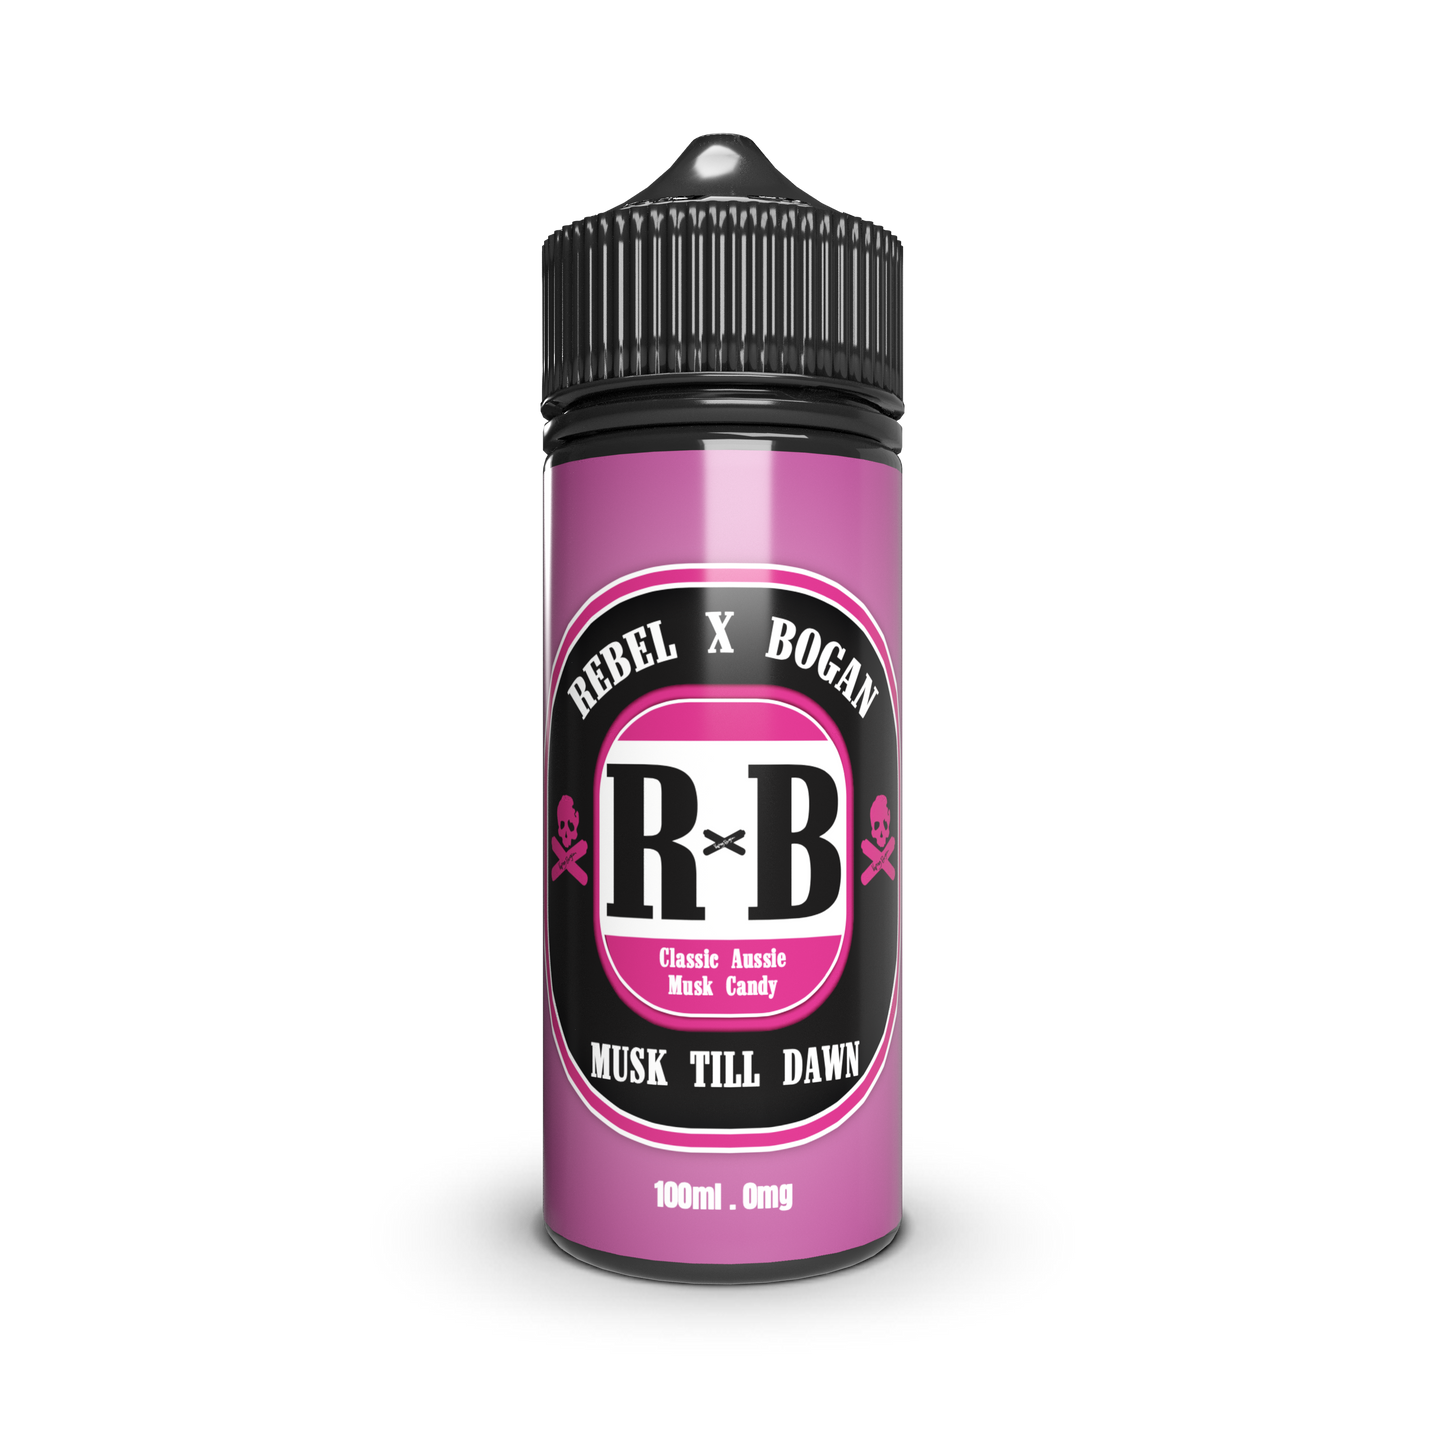 Buy Musk Till Dawn By Rebel and Bogan - Wick and Wire Co Melbourne Vape Shop, Victoria Australia